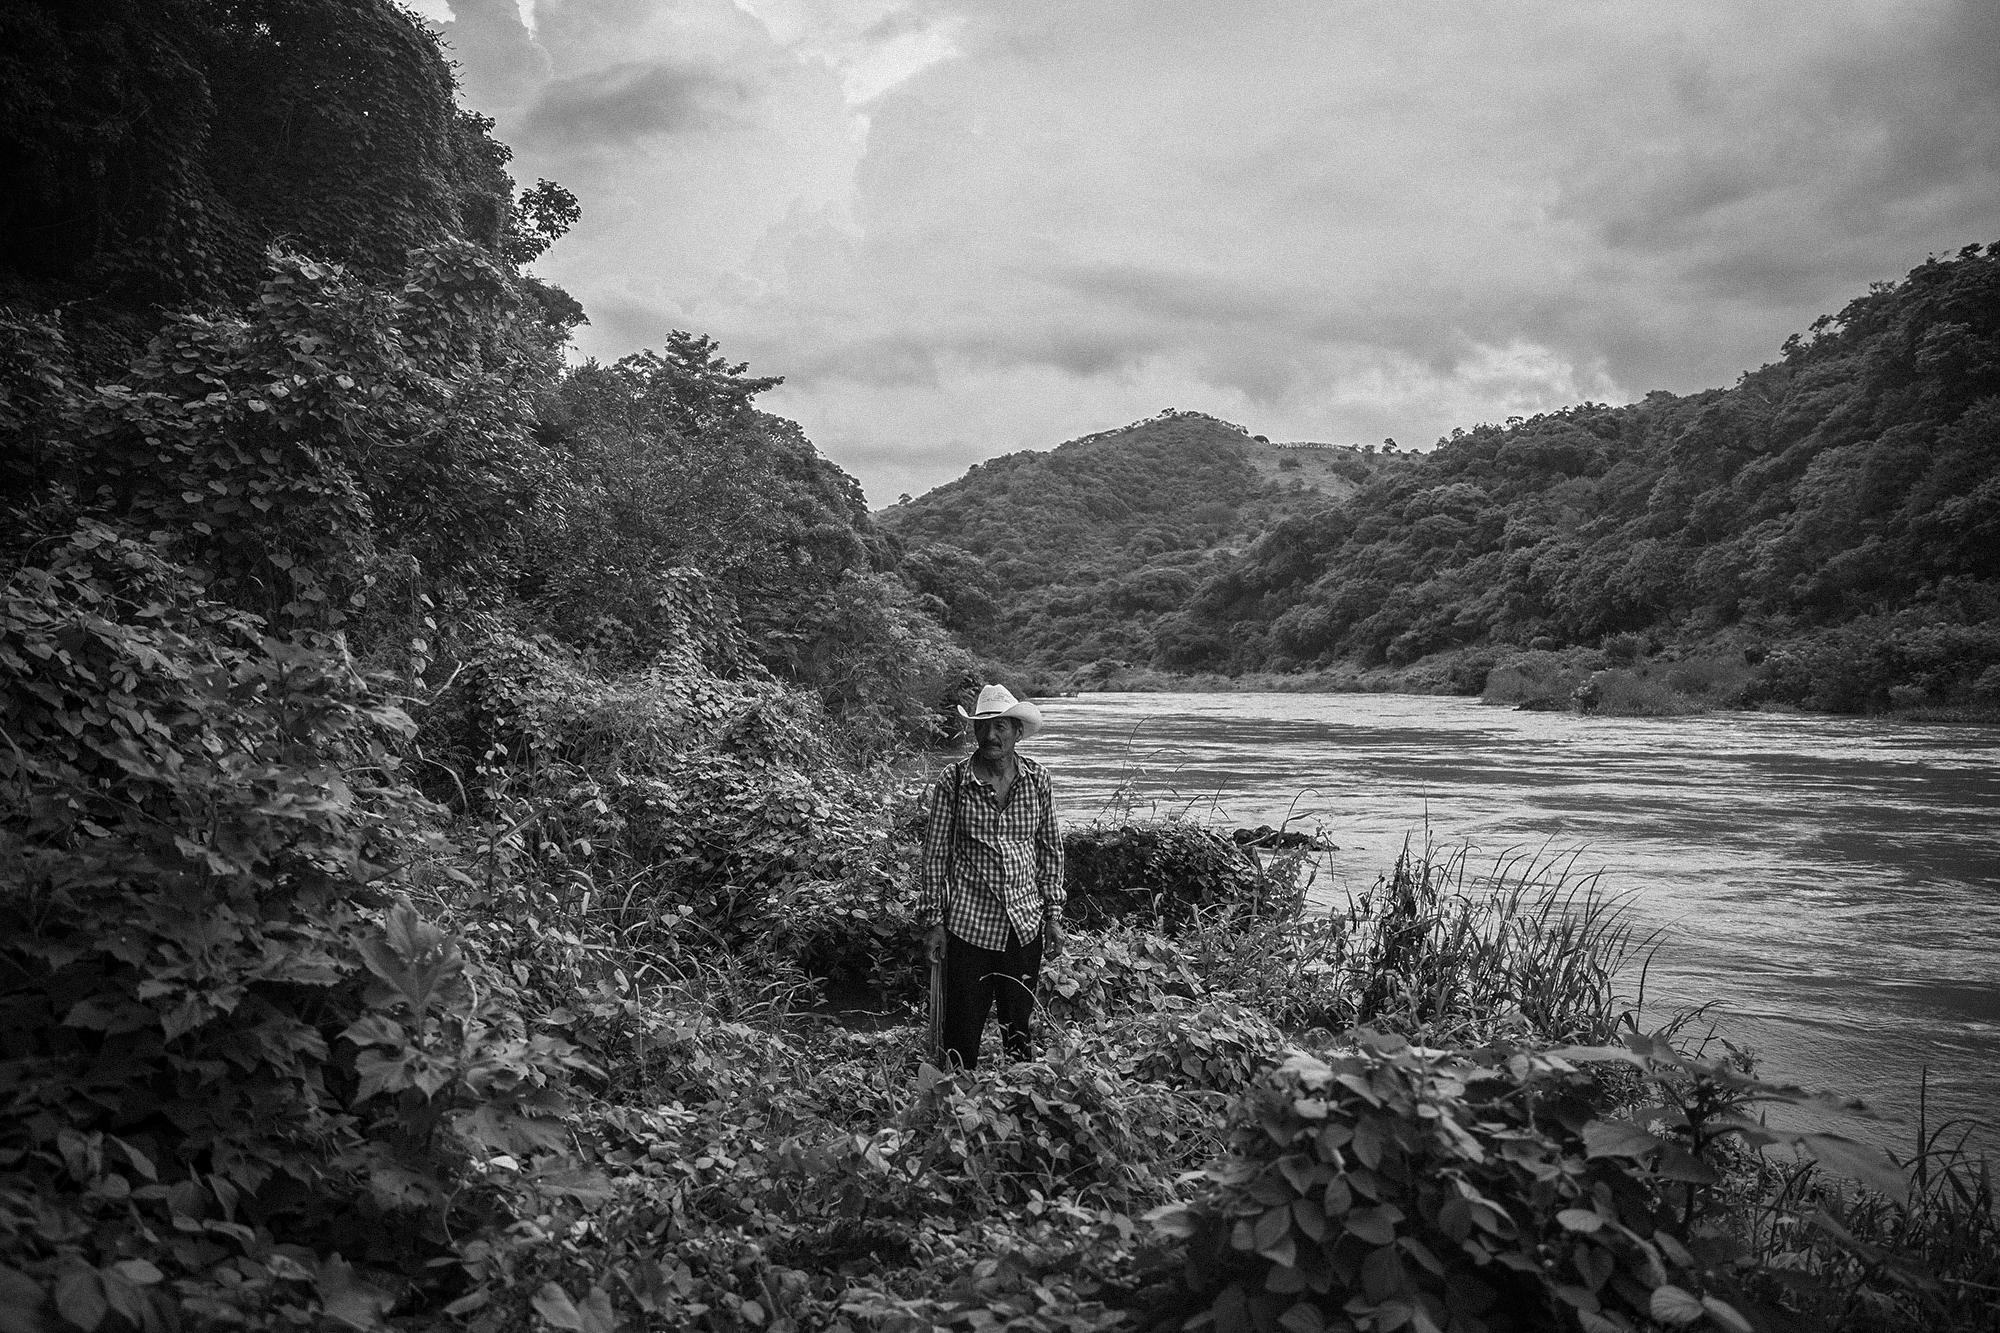 Gerardo Leiva on the banks of the Lempa River, at the site where he helped dozens of people cross on March 18, 1981. He remembers that to get to this point, his “compas” had to fight off the army as people made their way toward Honduras.